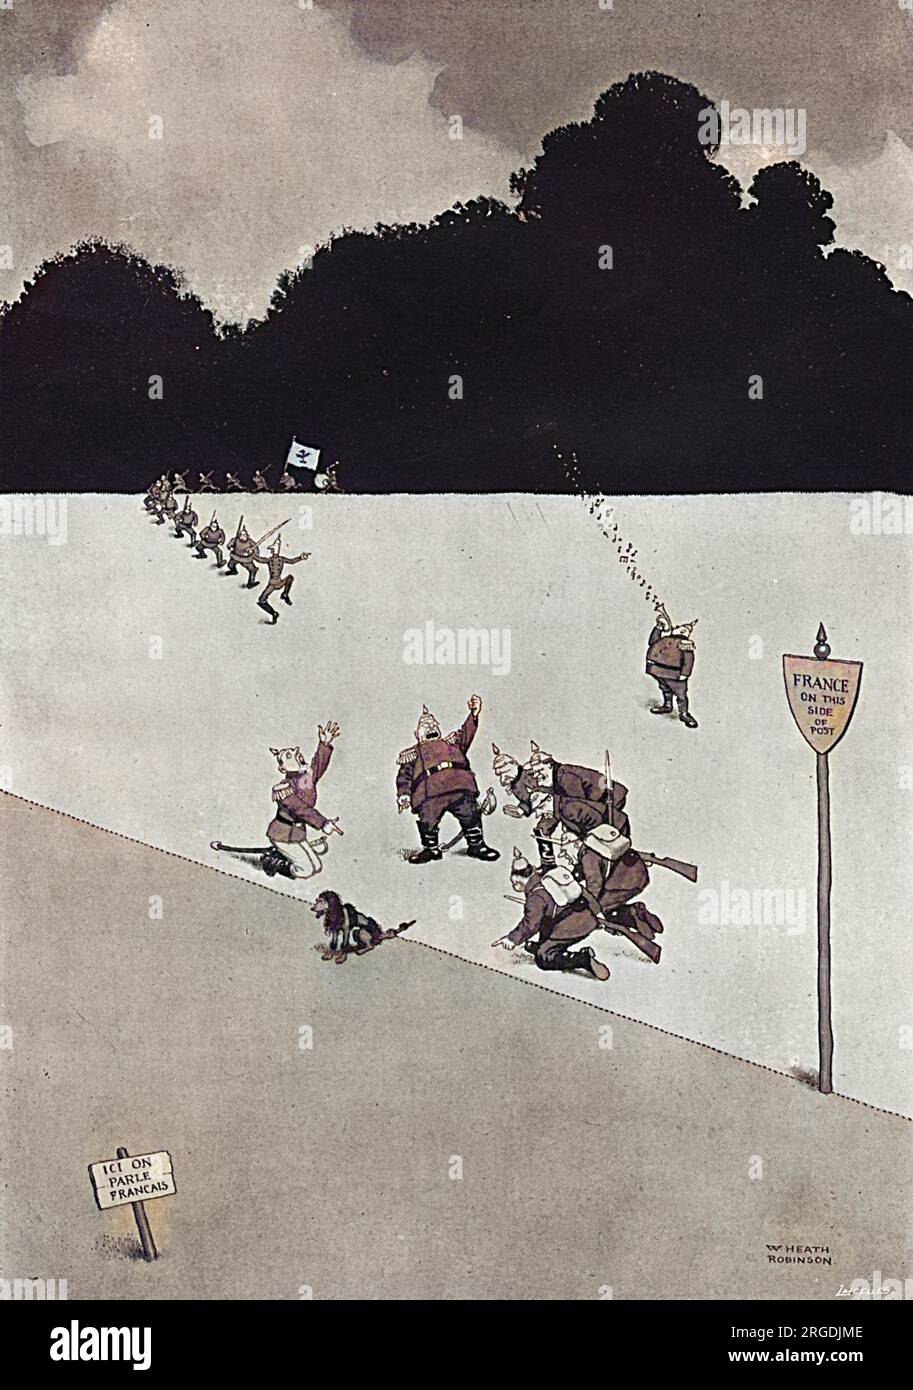 Heath Robinson gives his take on the cause of the First World War. A poodle's tail has strayed a few inches over the border, much to the dismay and rage of the German soldiers nearby. Stock Photo